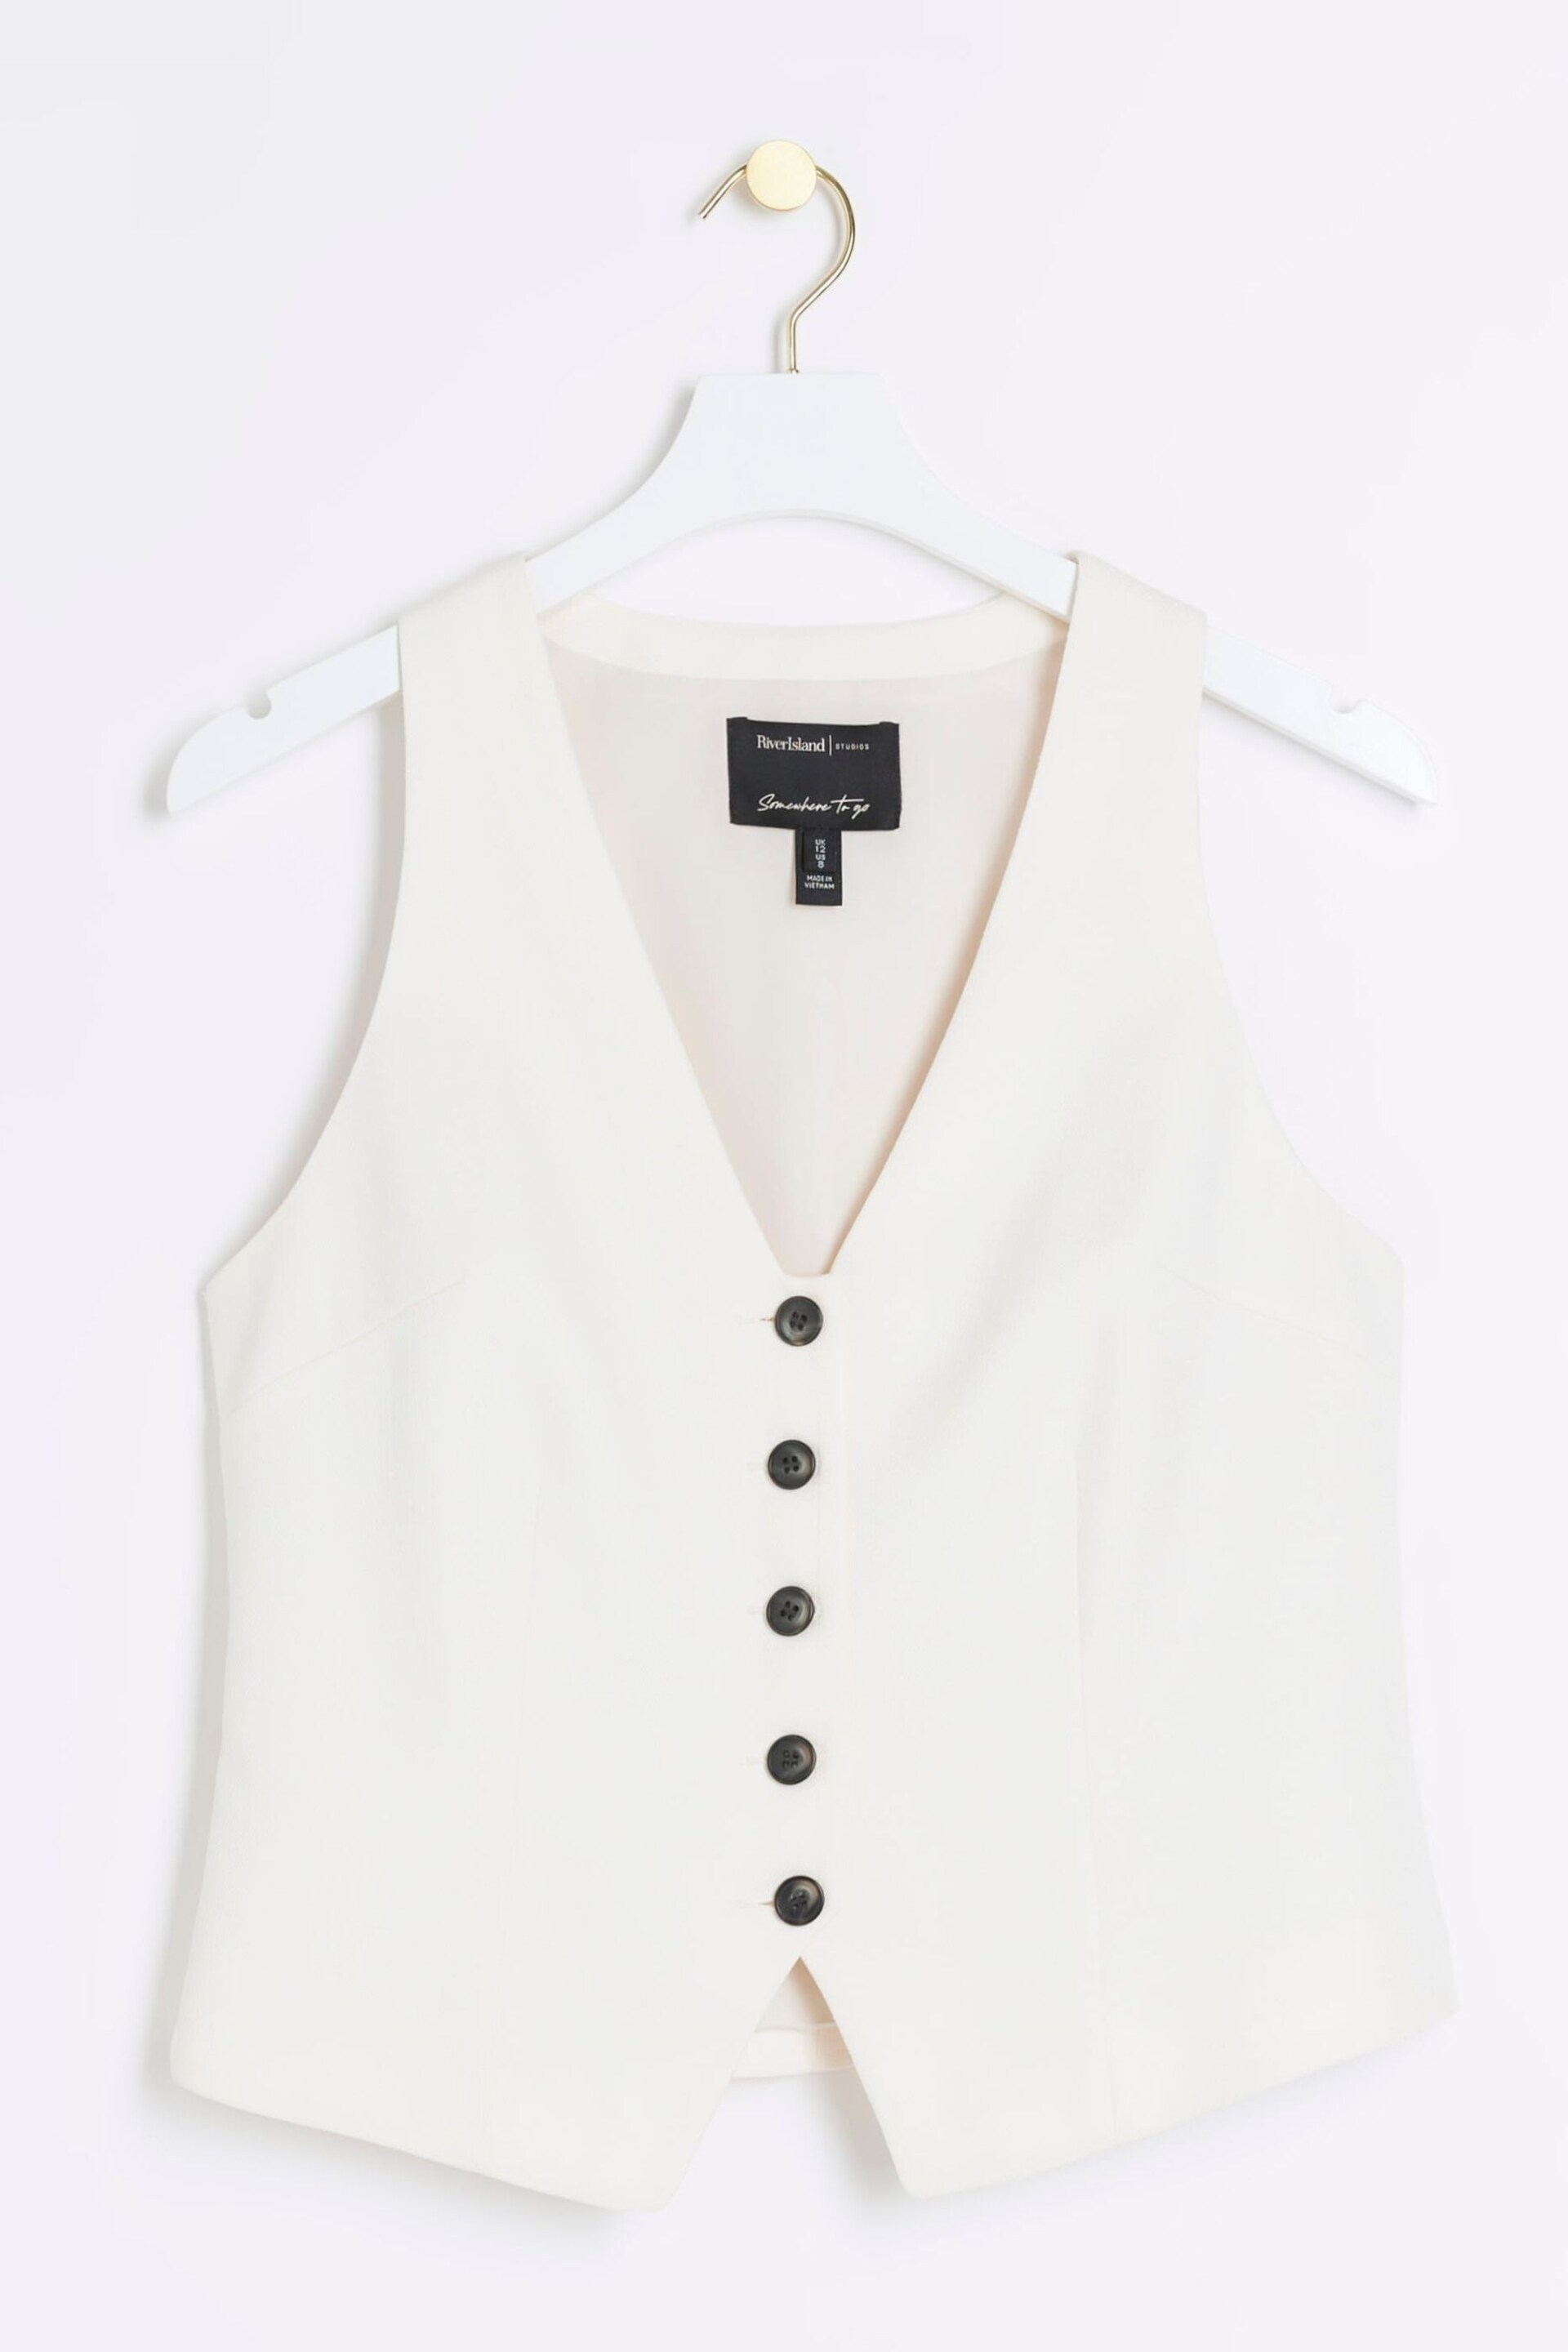 River Island Cream Button Front Tailored Waistcoat - Image 5 of 6